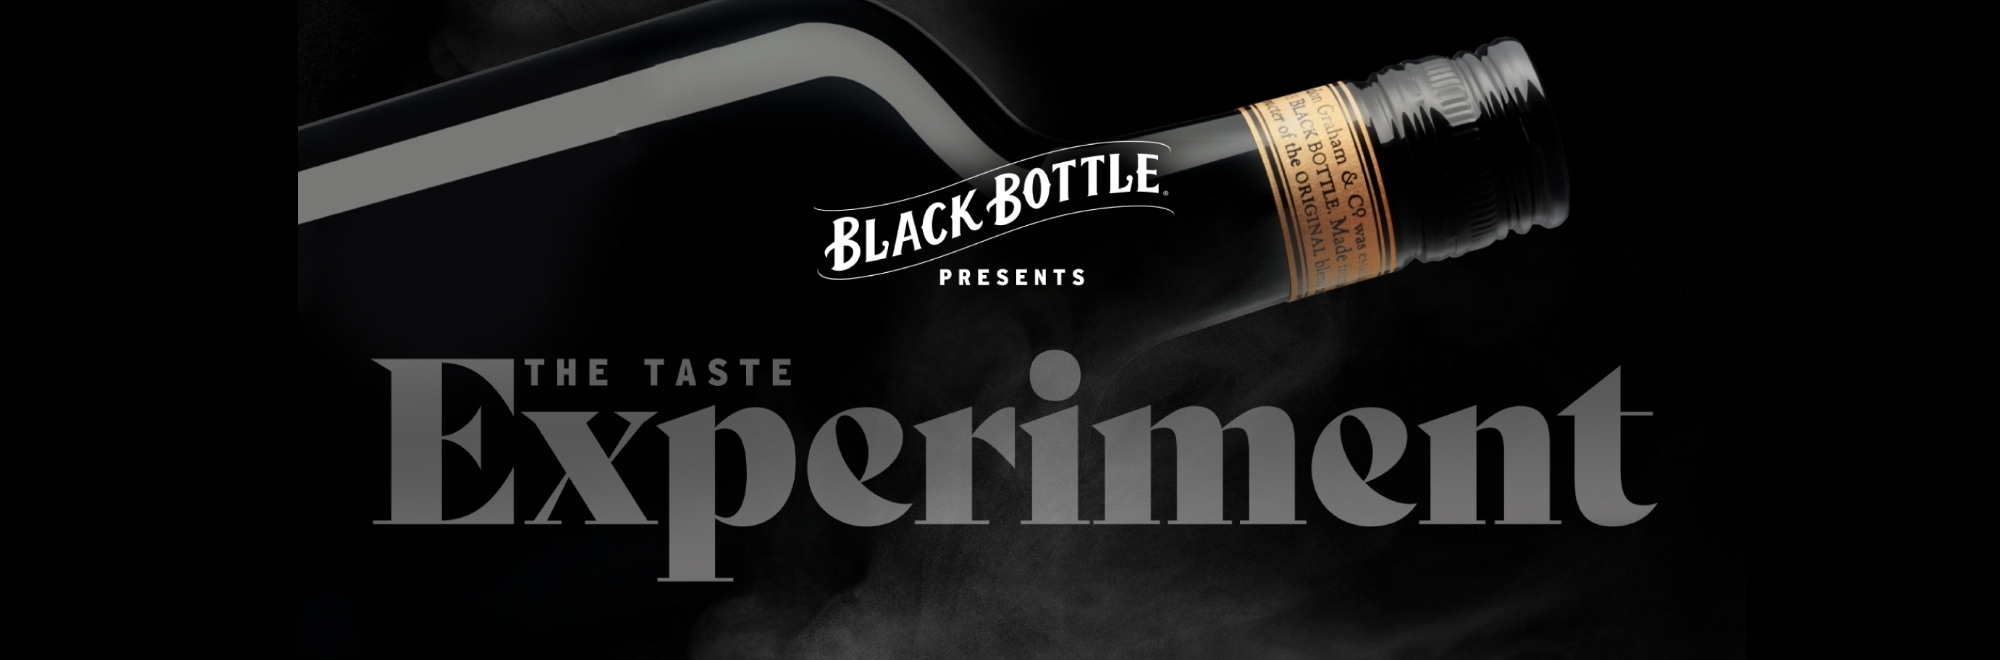 The Black Bottle Taste Experiment: A world-first using sound to alter the taste of whisky